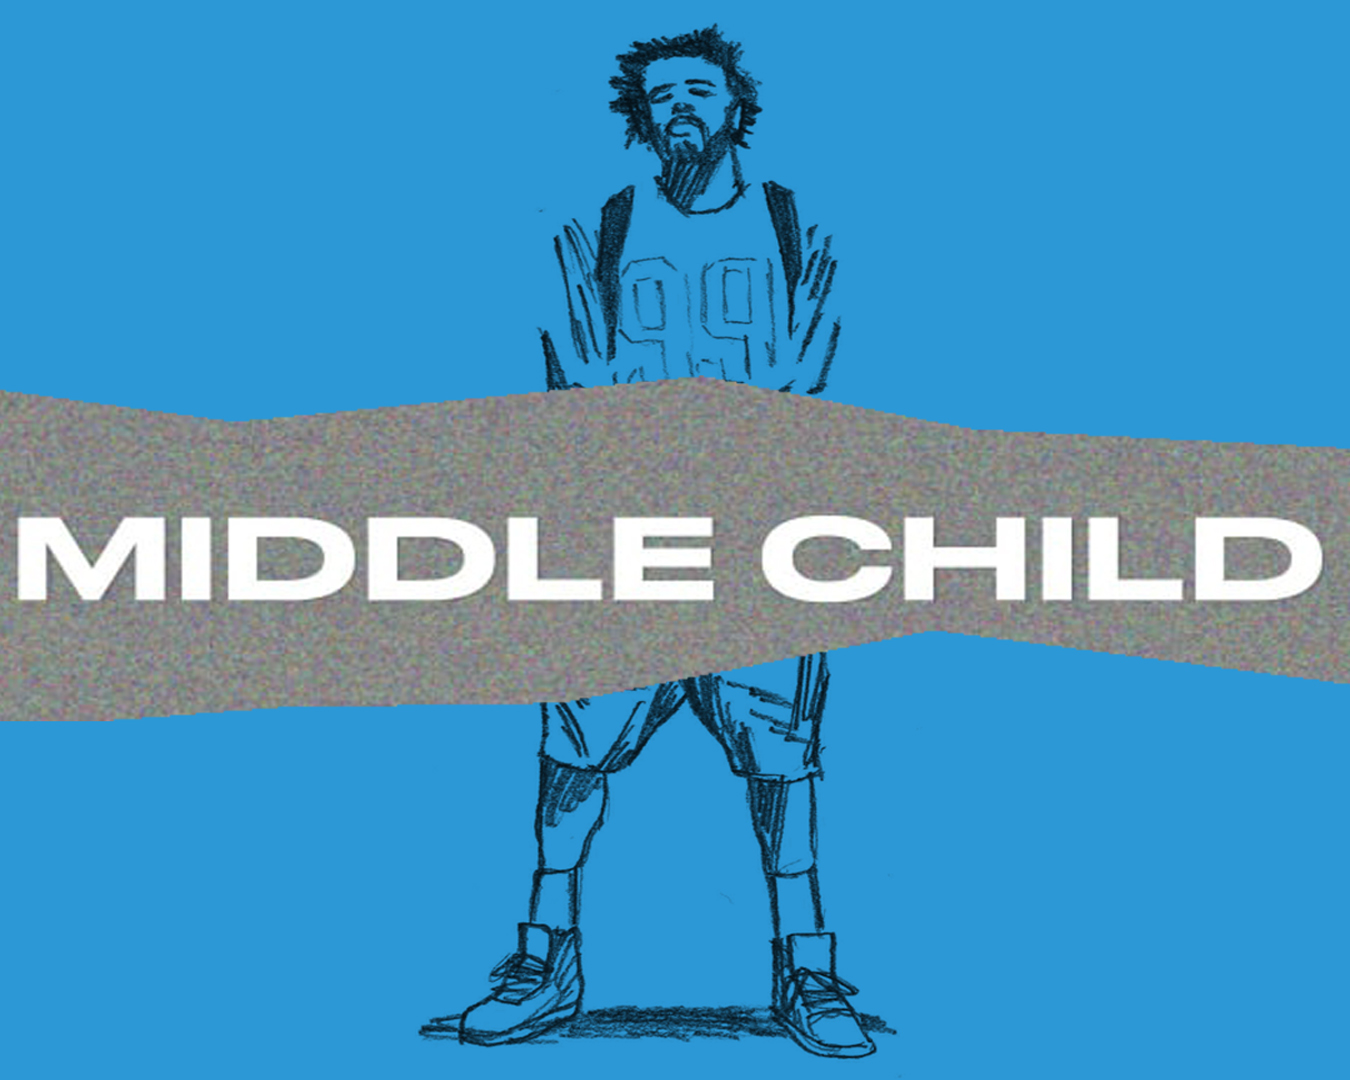 "Middle Child" points out the rap industry's shortcomings, and gives the black community hope. (Illustration via Luca Bowles, Kingston University)